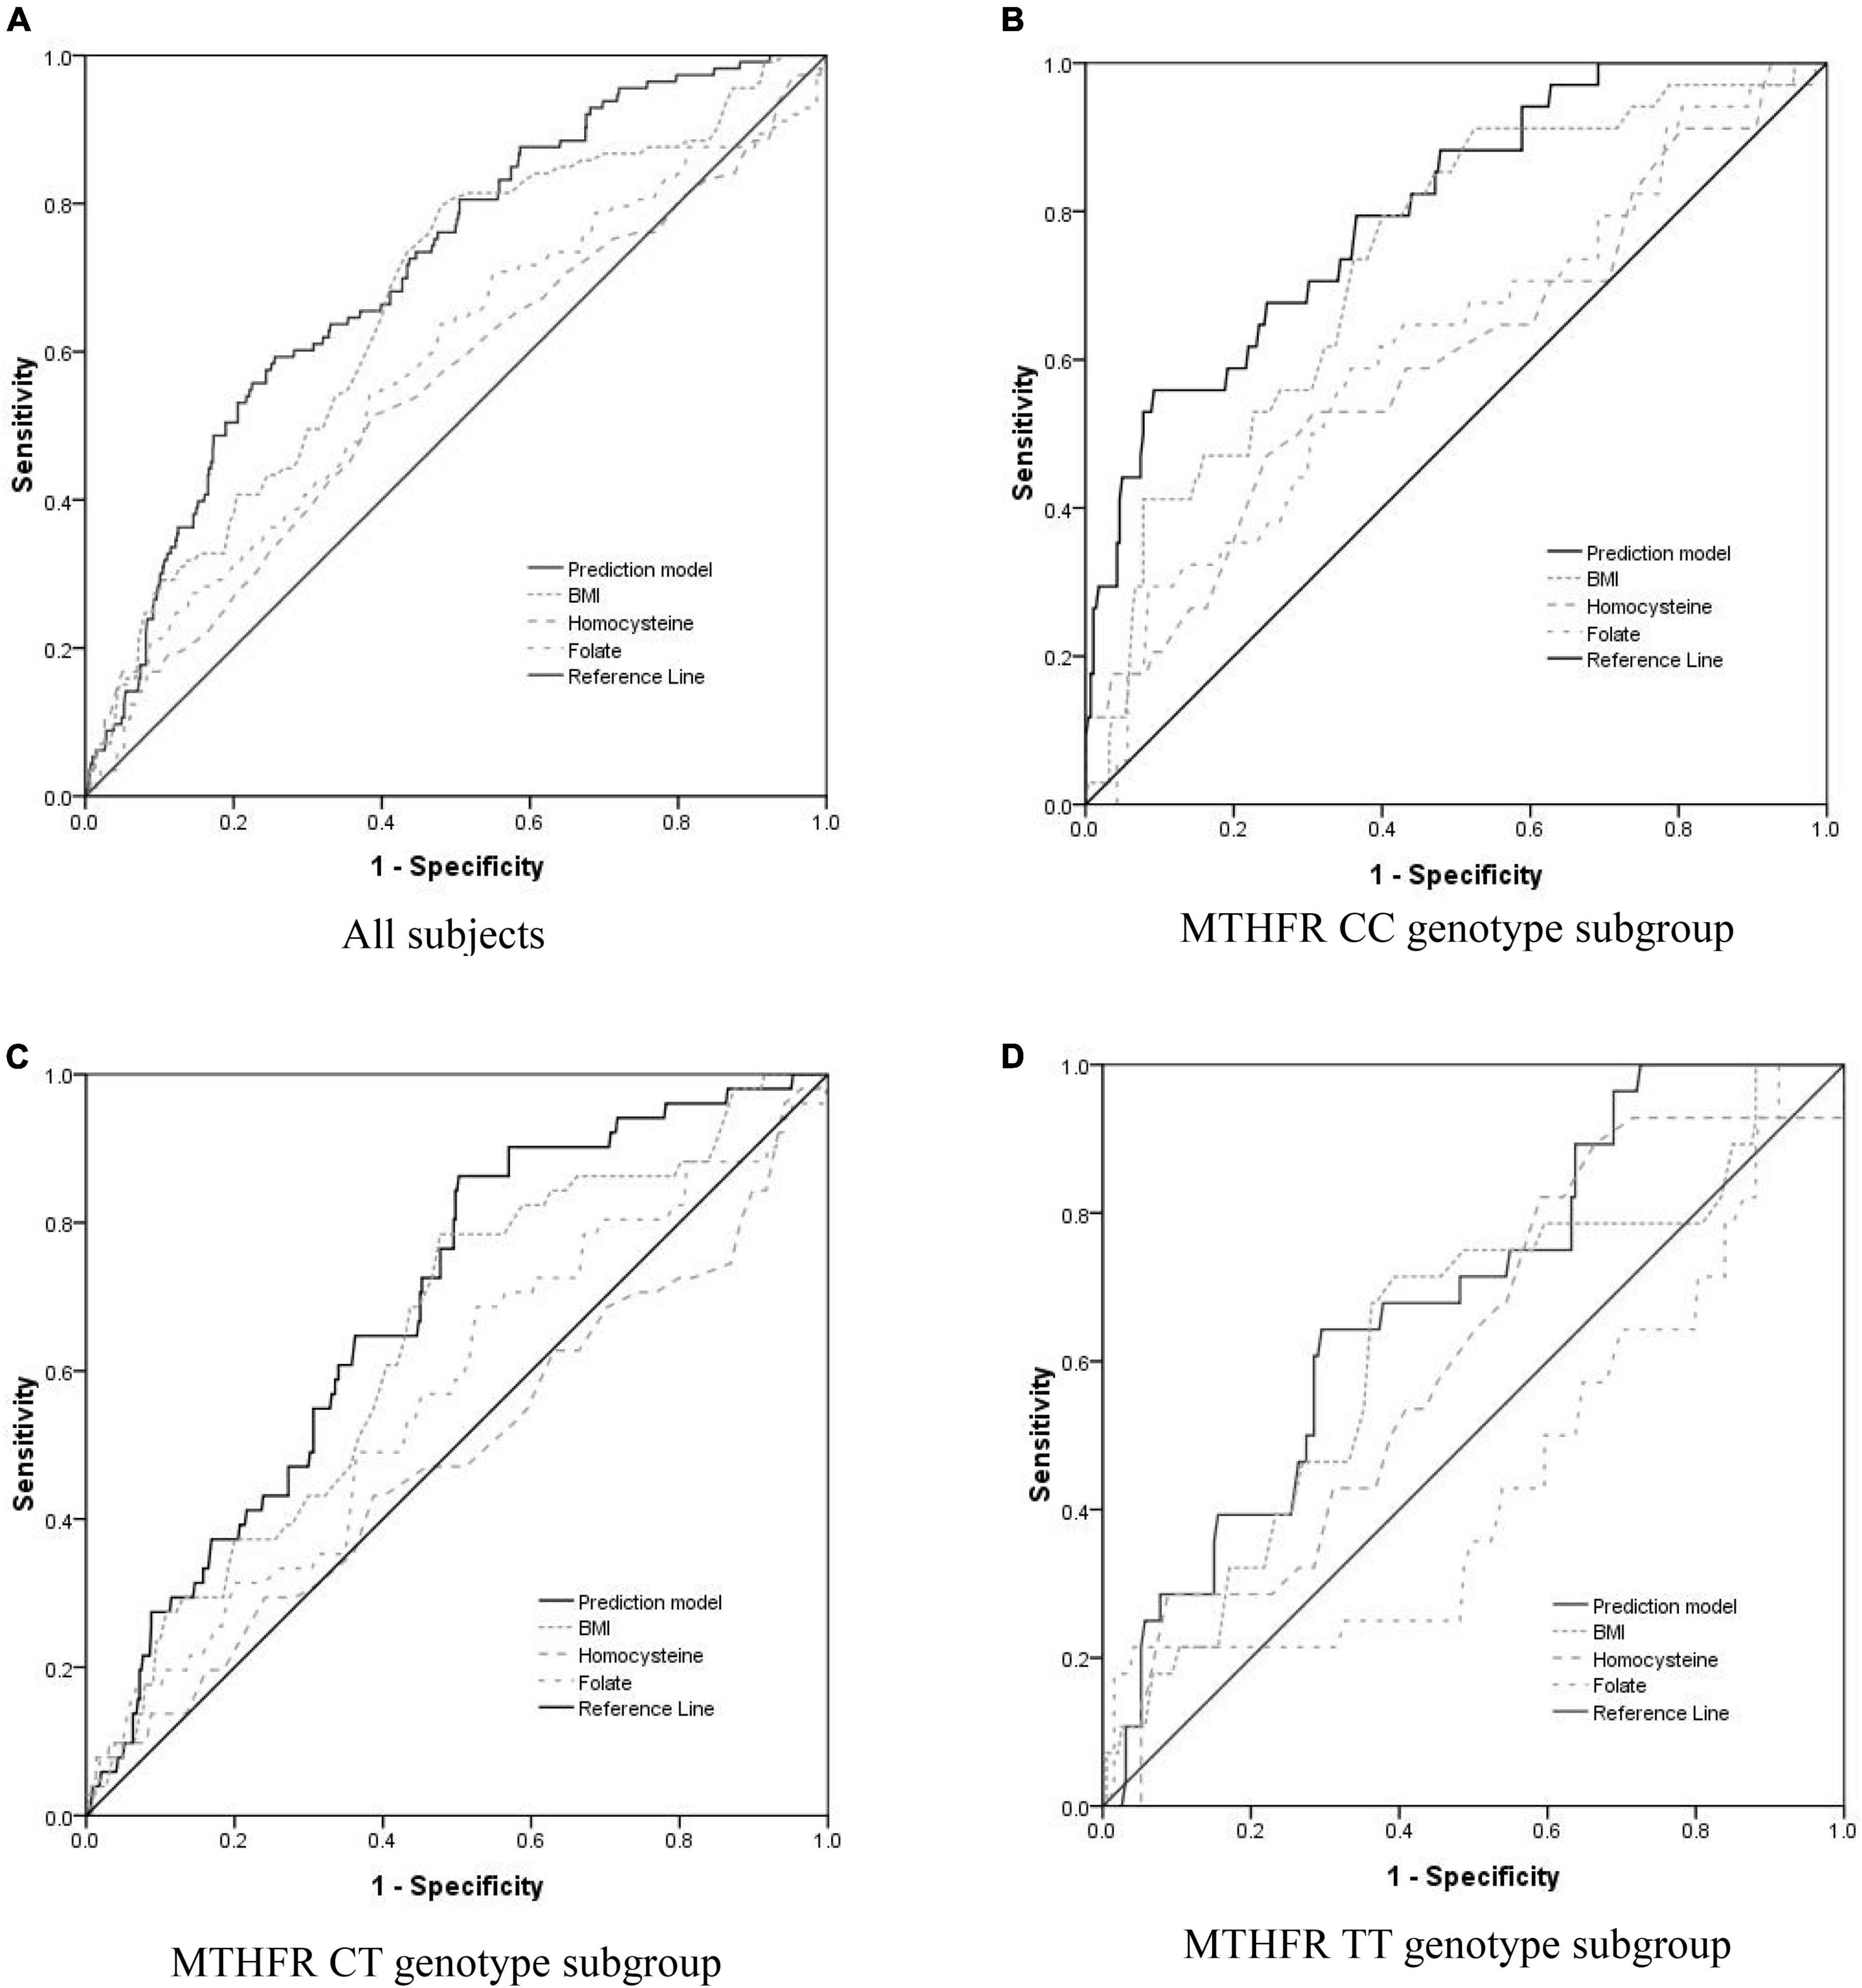 Interrelation among one-carbon metabolic (OCM) pathway-related indicators and its impact on the occurence of pregnancy-induced hypertension disease in pregnant women supplemented with folate and vitamin B12: Real-world data analysis